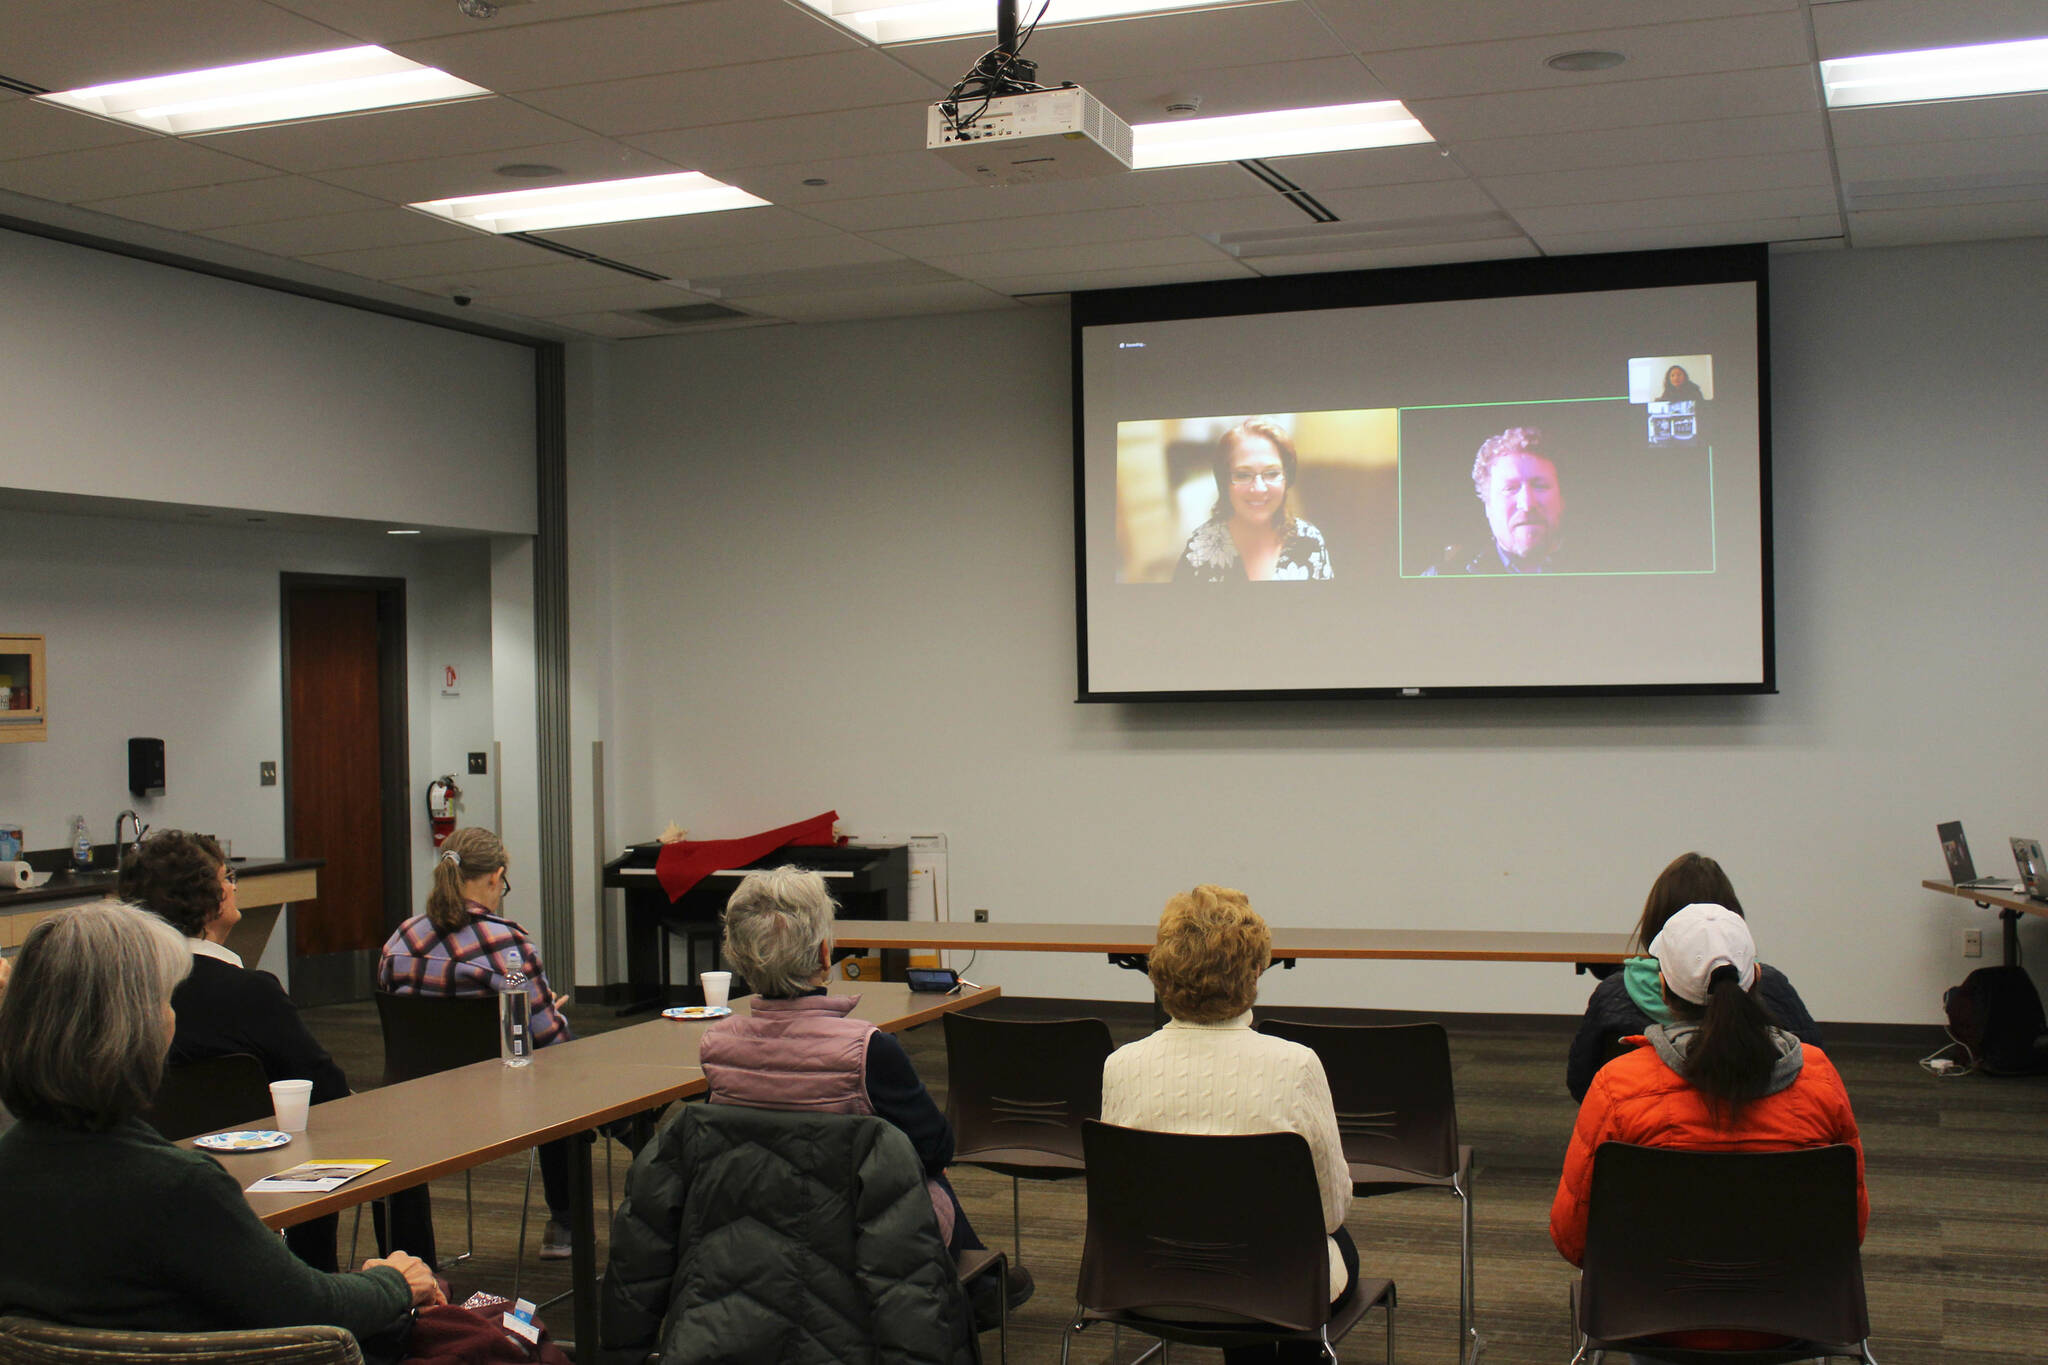 Candidates for Alaska State House District 6 Ginger Bryant (left) and Louie Flora (right) participate remotely in a forum held at the Soldotna Public Library on Monday, Oct. 24, 2022, in Soldotna, Alaska. (Ashlyn O’Hara/Peninsula Clarion)